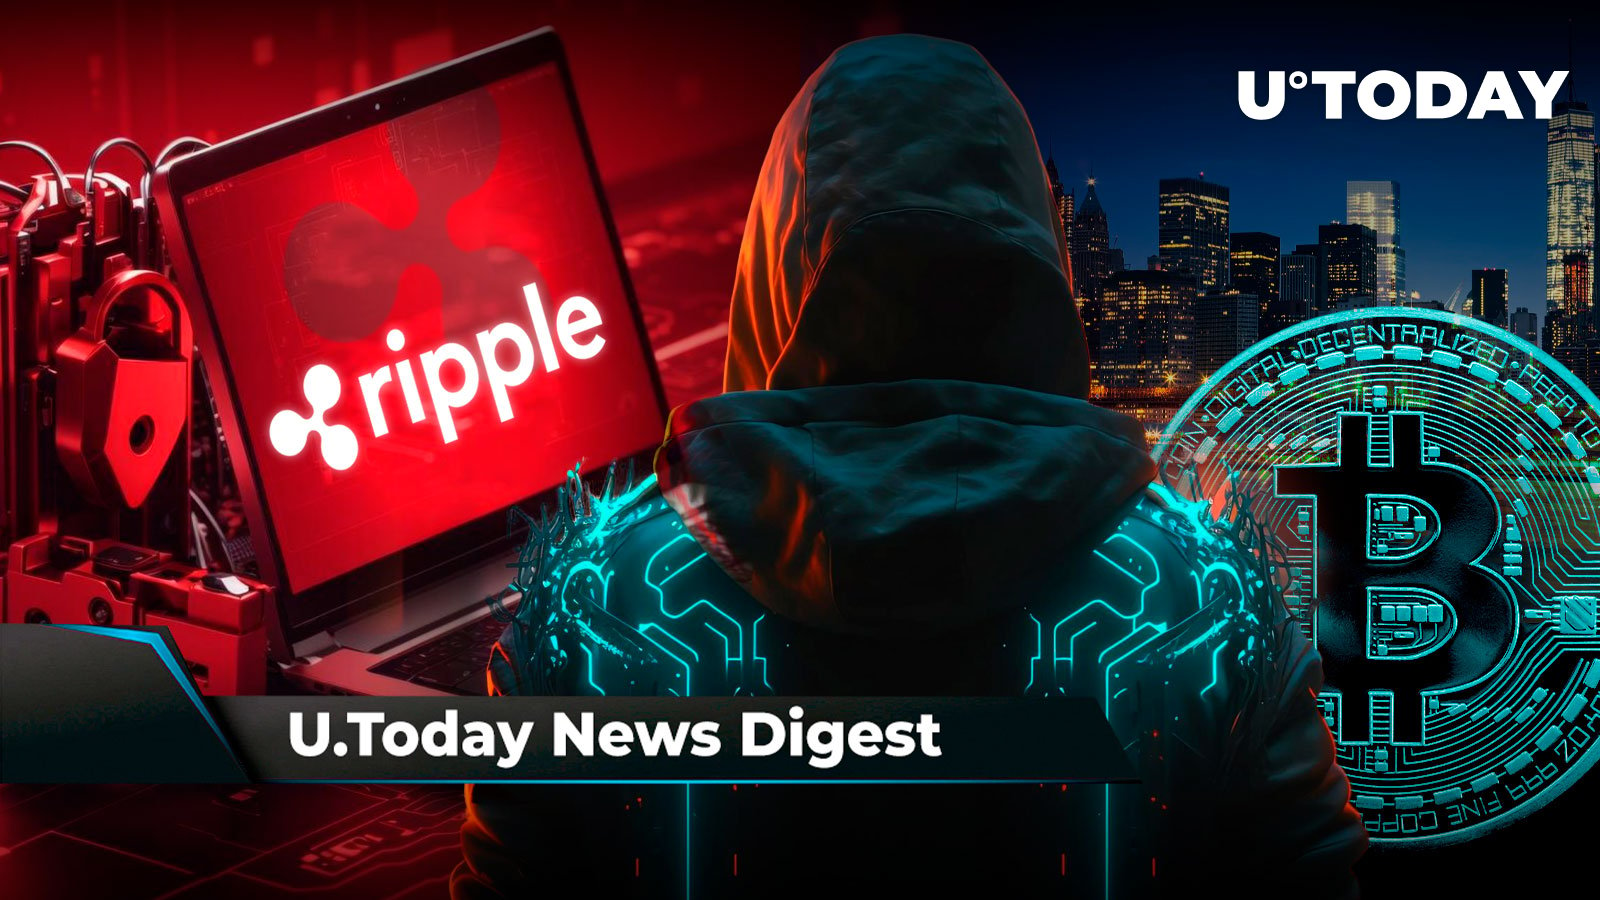 Ripple Hack Drama Takes Surprising Turn, Satoshi Nakamoto 'Appears' in Times Square in New York City, Shibarium Skyrockets 621%: Crypto News Digest by U.Today